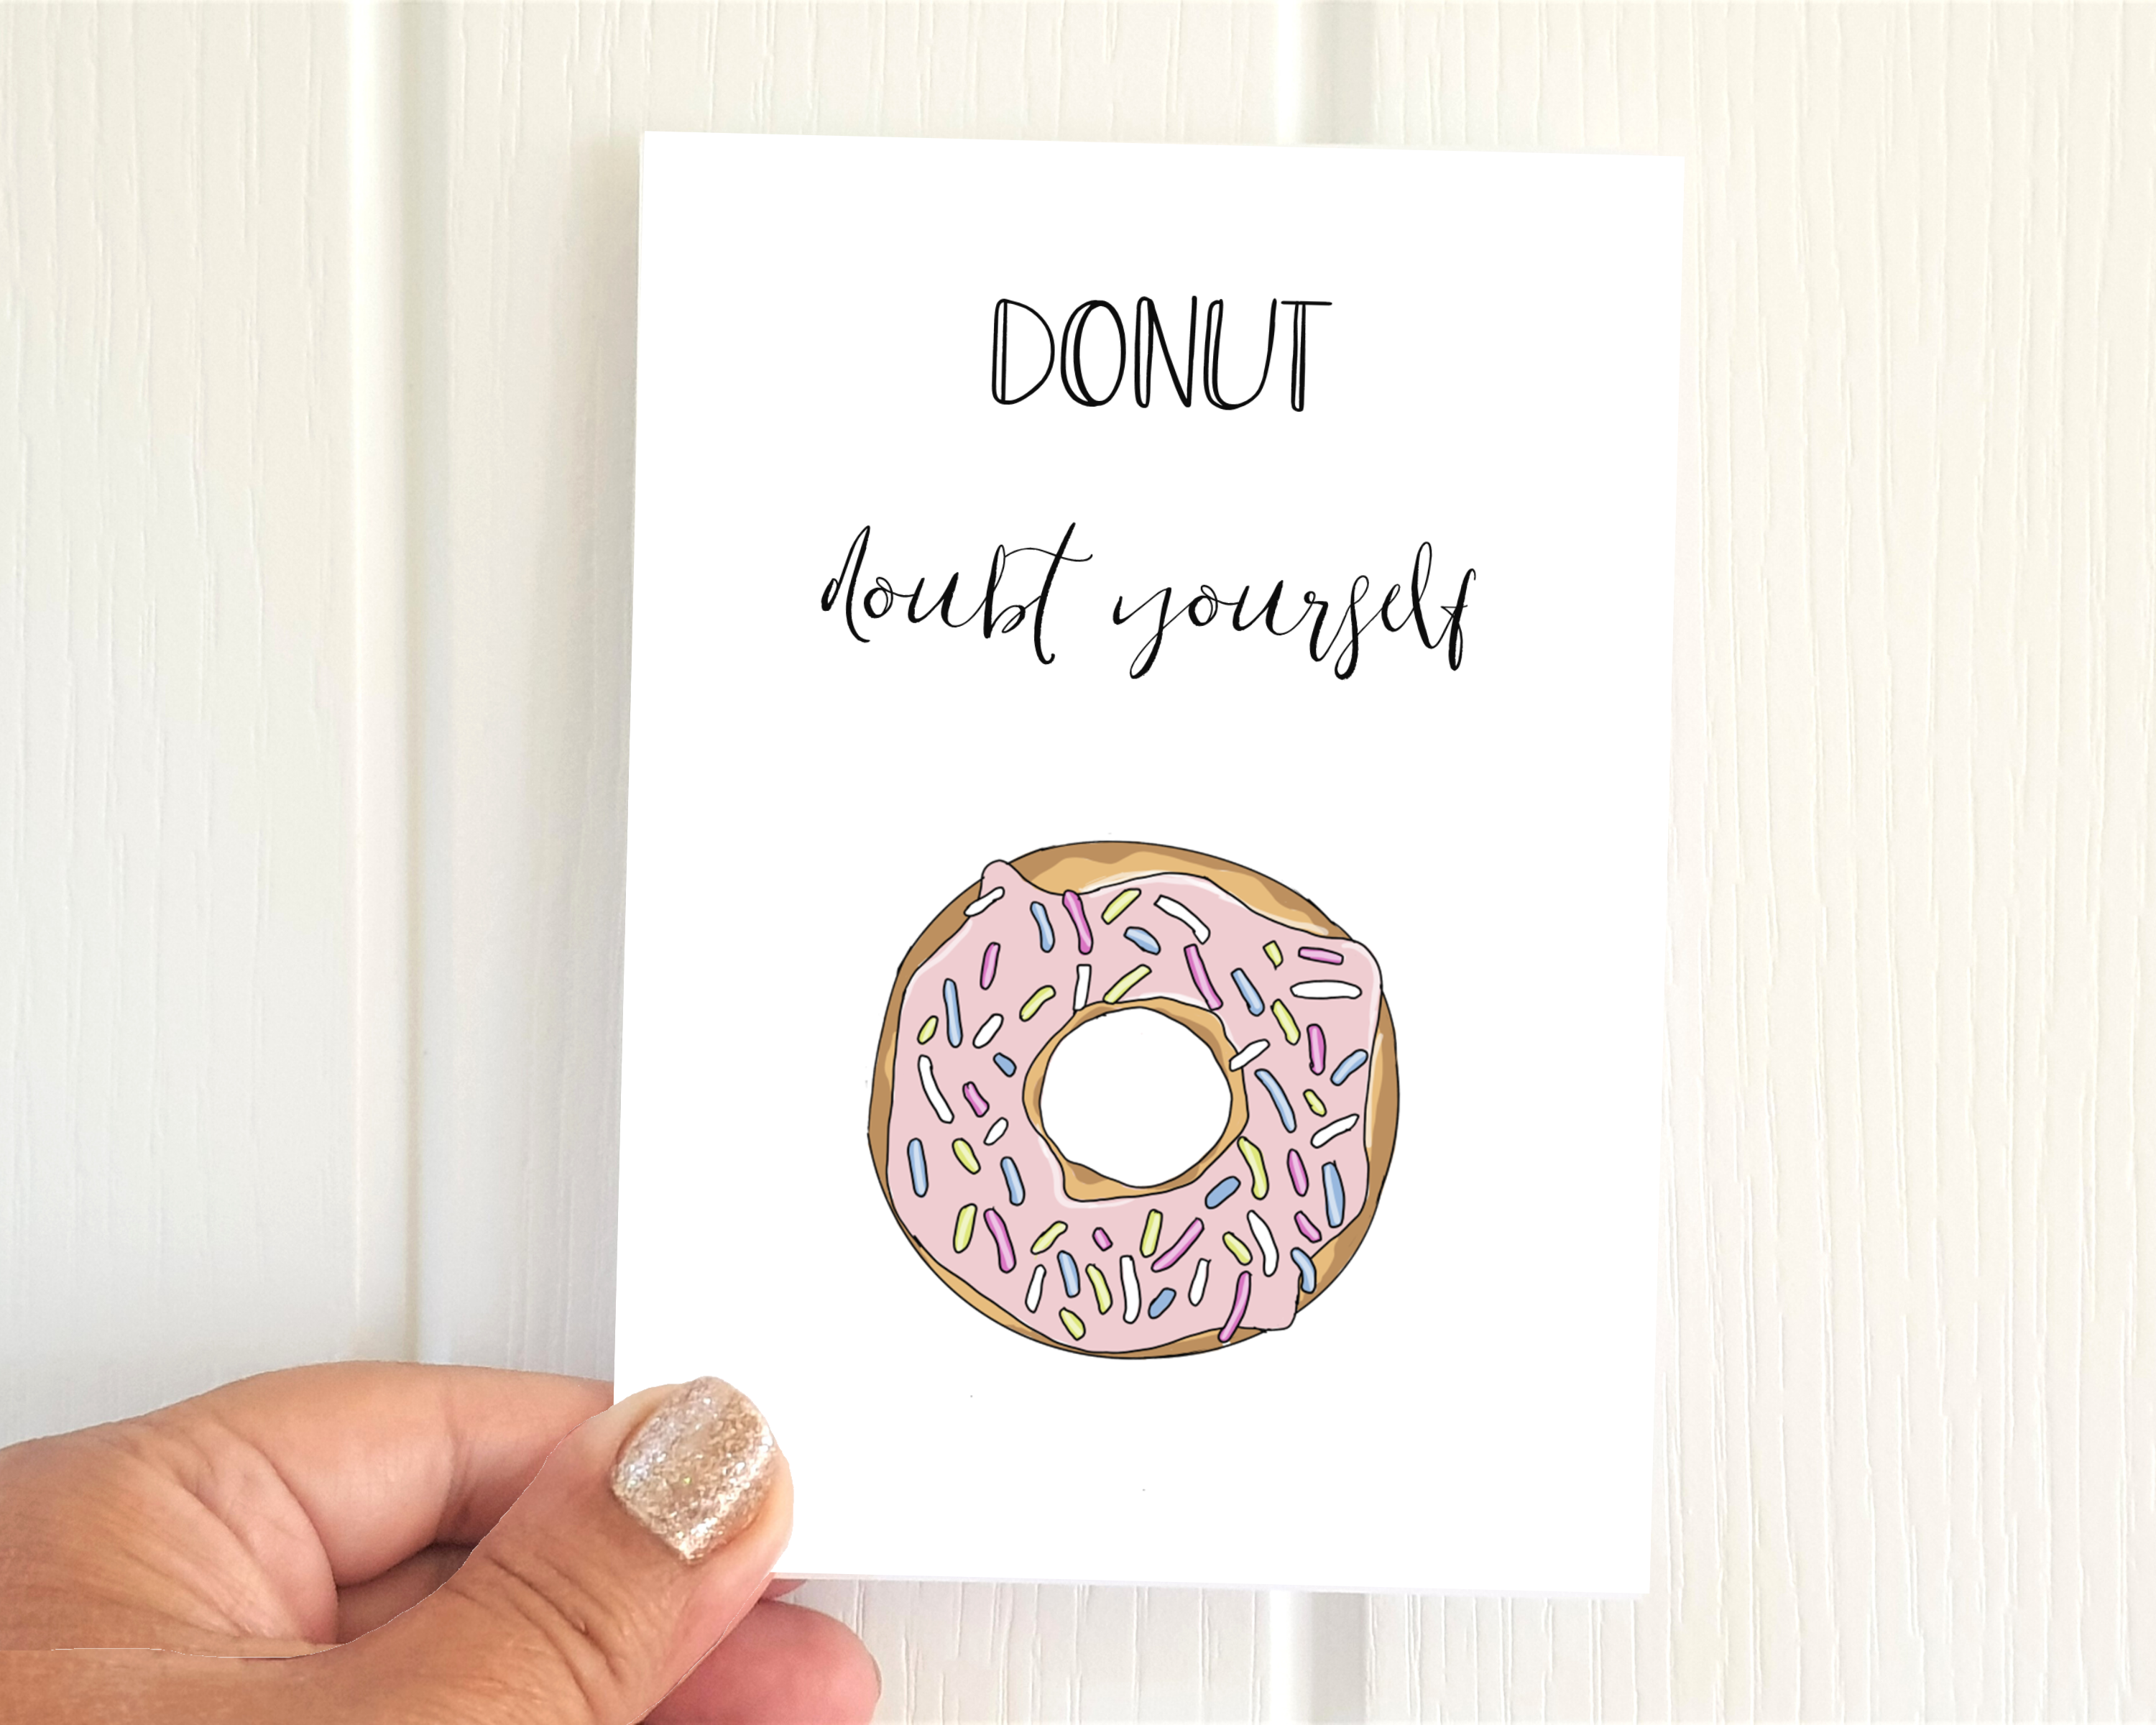 Poppleberry A6 ''Donut' Doubt Yourself' positivity postcard, with a pink donut illustration & pun, on white cardstock.